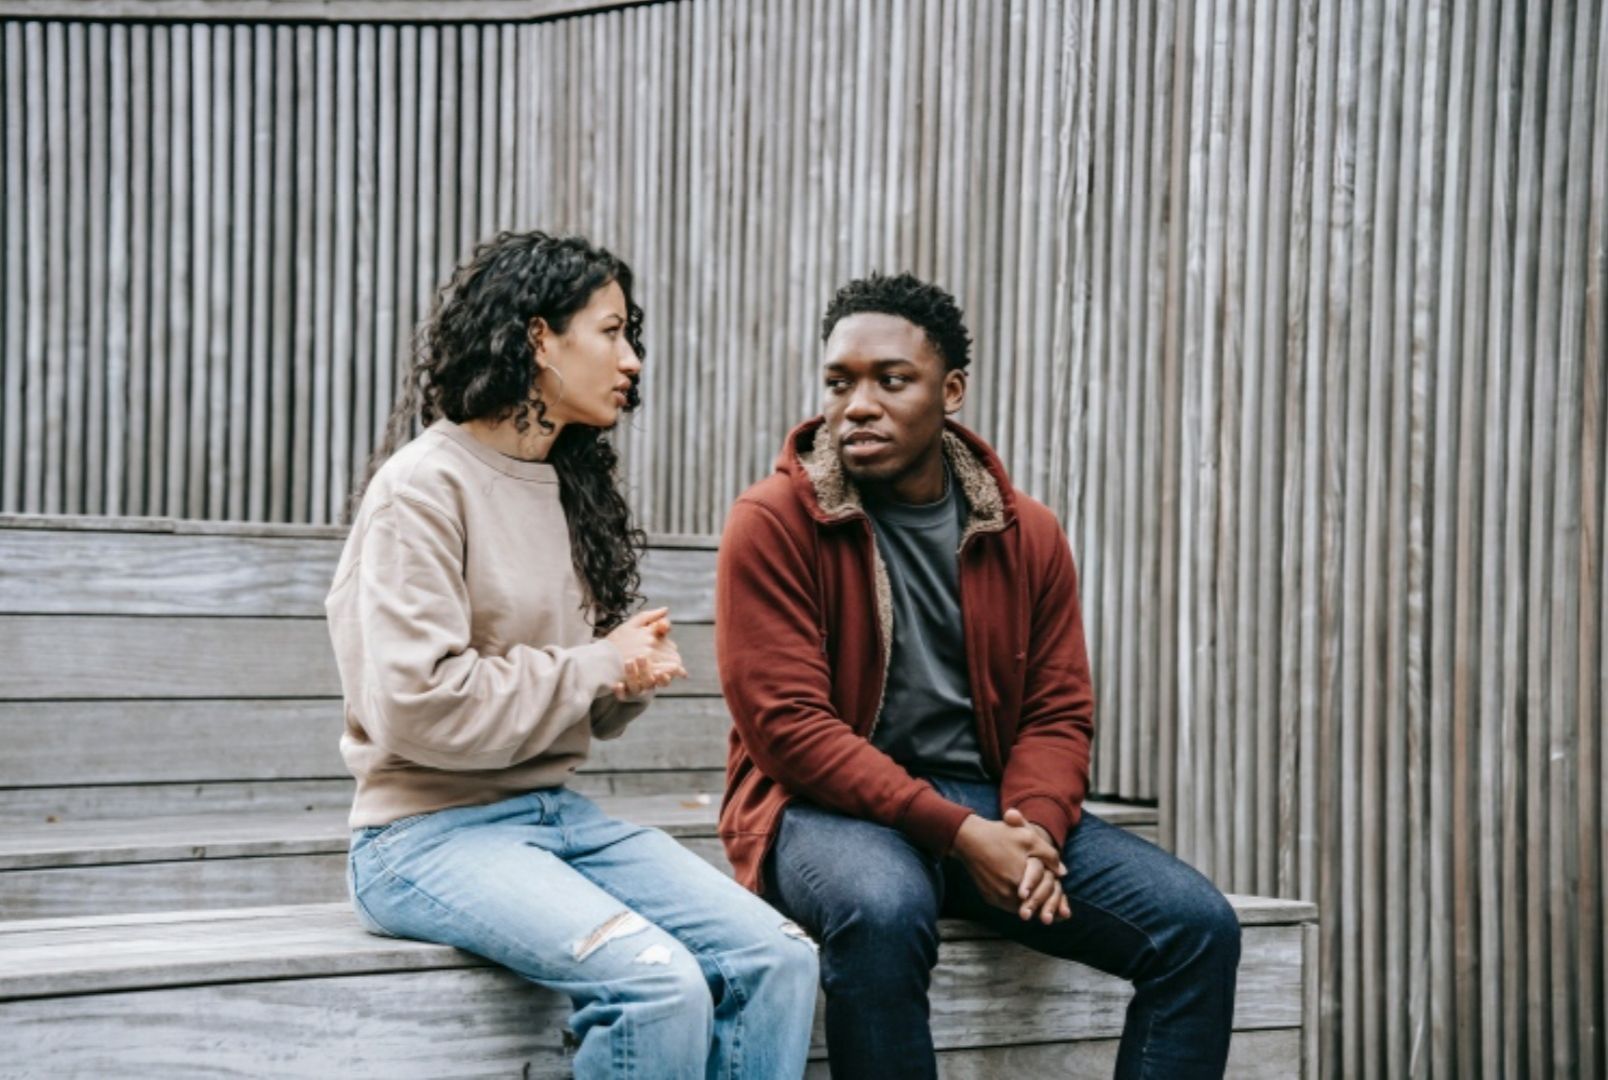 Photo by Keira Burton: https://www.pexels.com/photo/unsatisfied-multiethnic-couple-having-conversation-on-stairs-6147241/